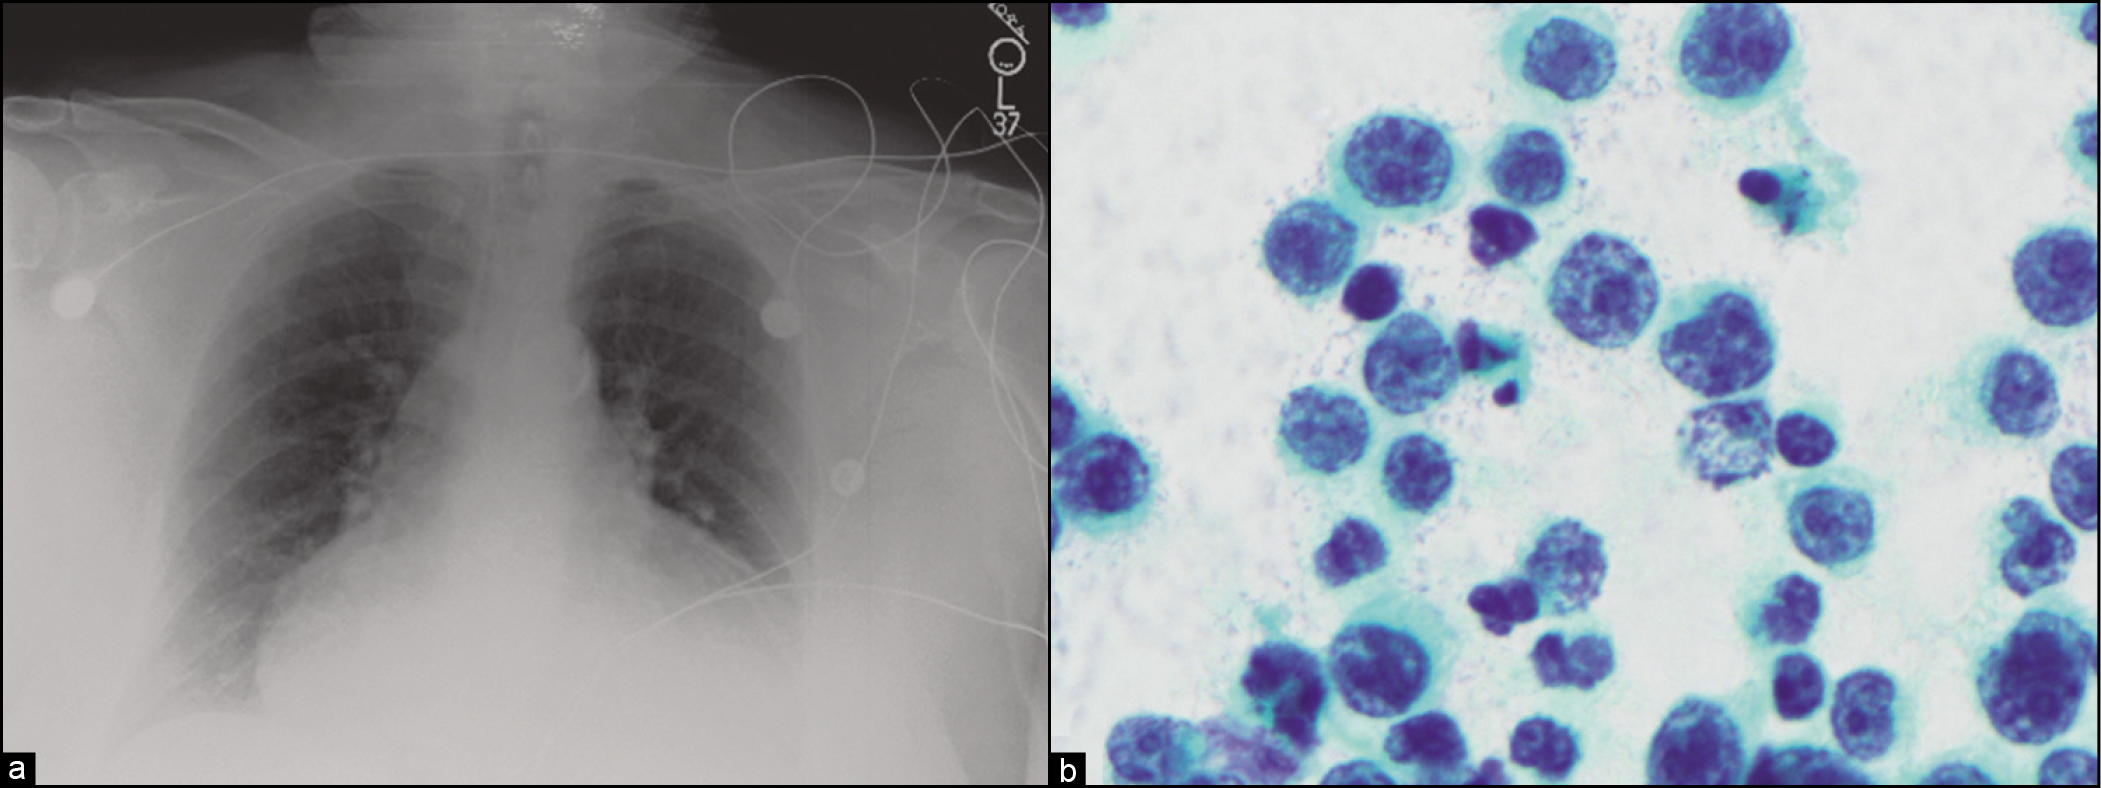 (a) Chest radiograph showing cardiomegaly in a patient with severe dyspnea and massive malignant pericardial effusion. (b) Pericardial fluid cytology, in patient from (a), presenting with primary cardiac lymphoma and isolated massive pericardial effusion. This case turned out to be diffuse large B-cell lymphoma.